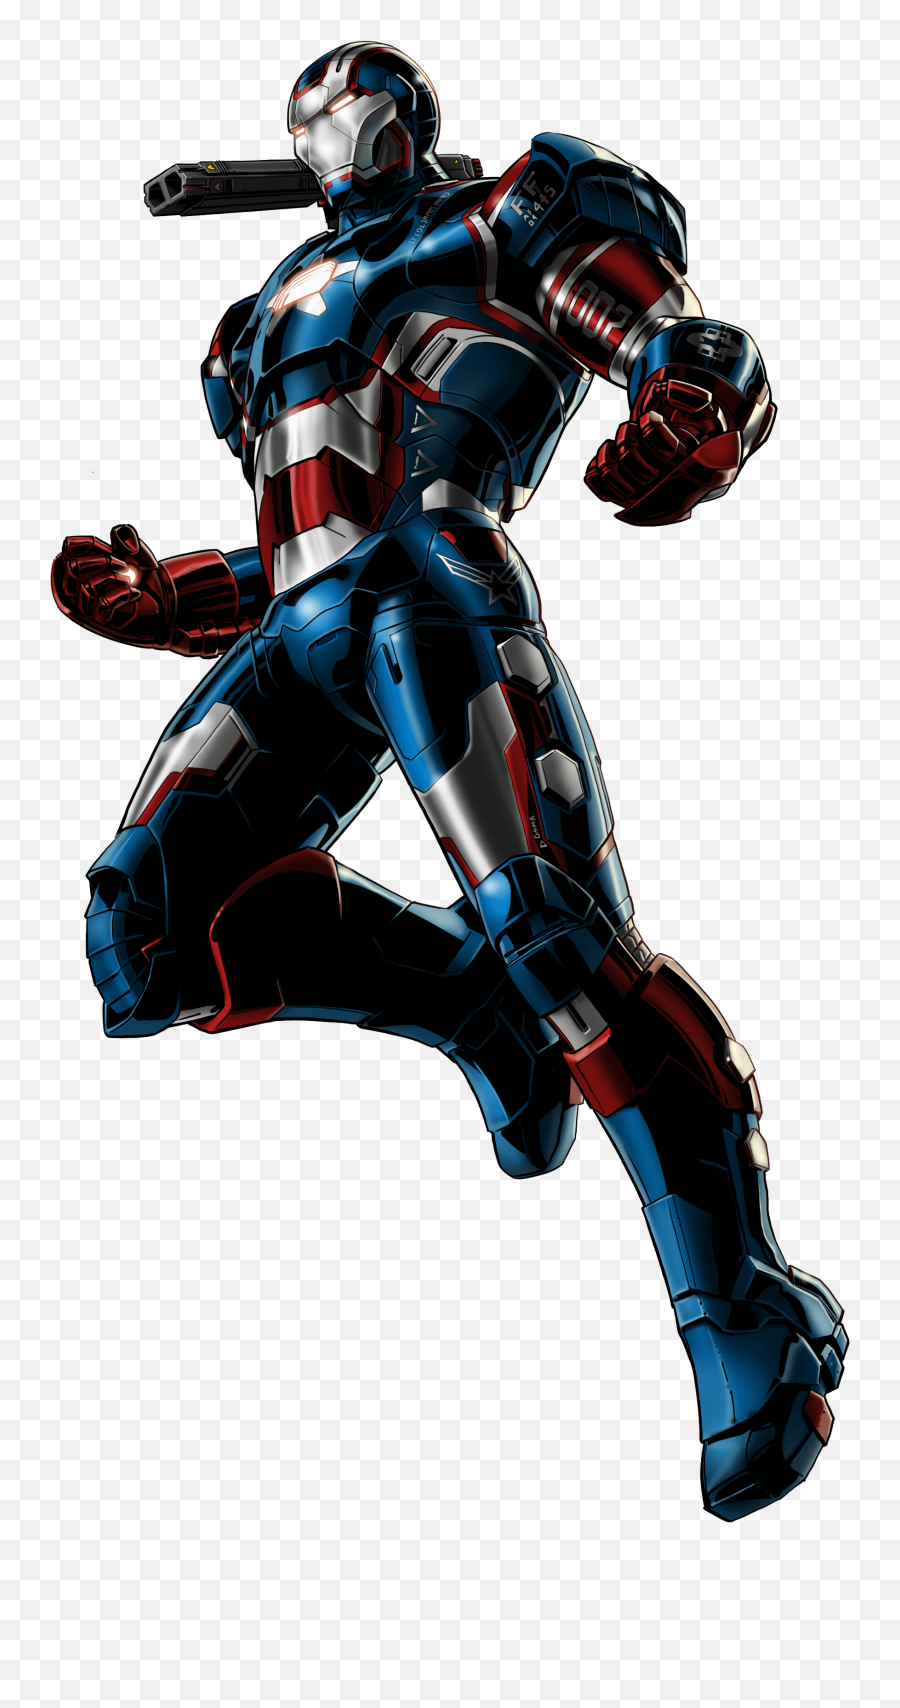 Iron Patriot With A Shield Png Image - War Machine Marvel Avengers Alliance,Patriot Png